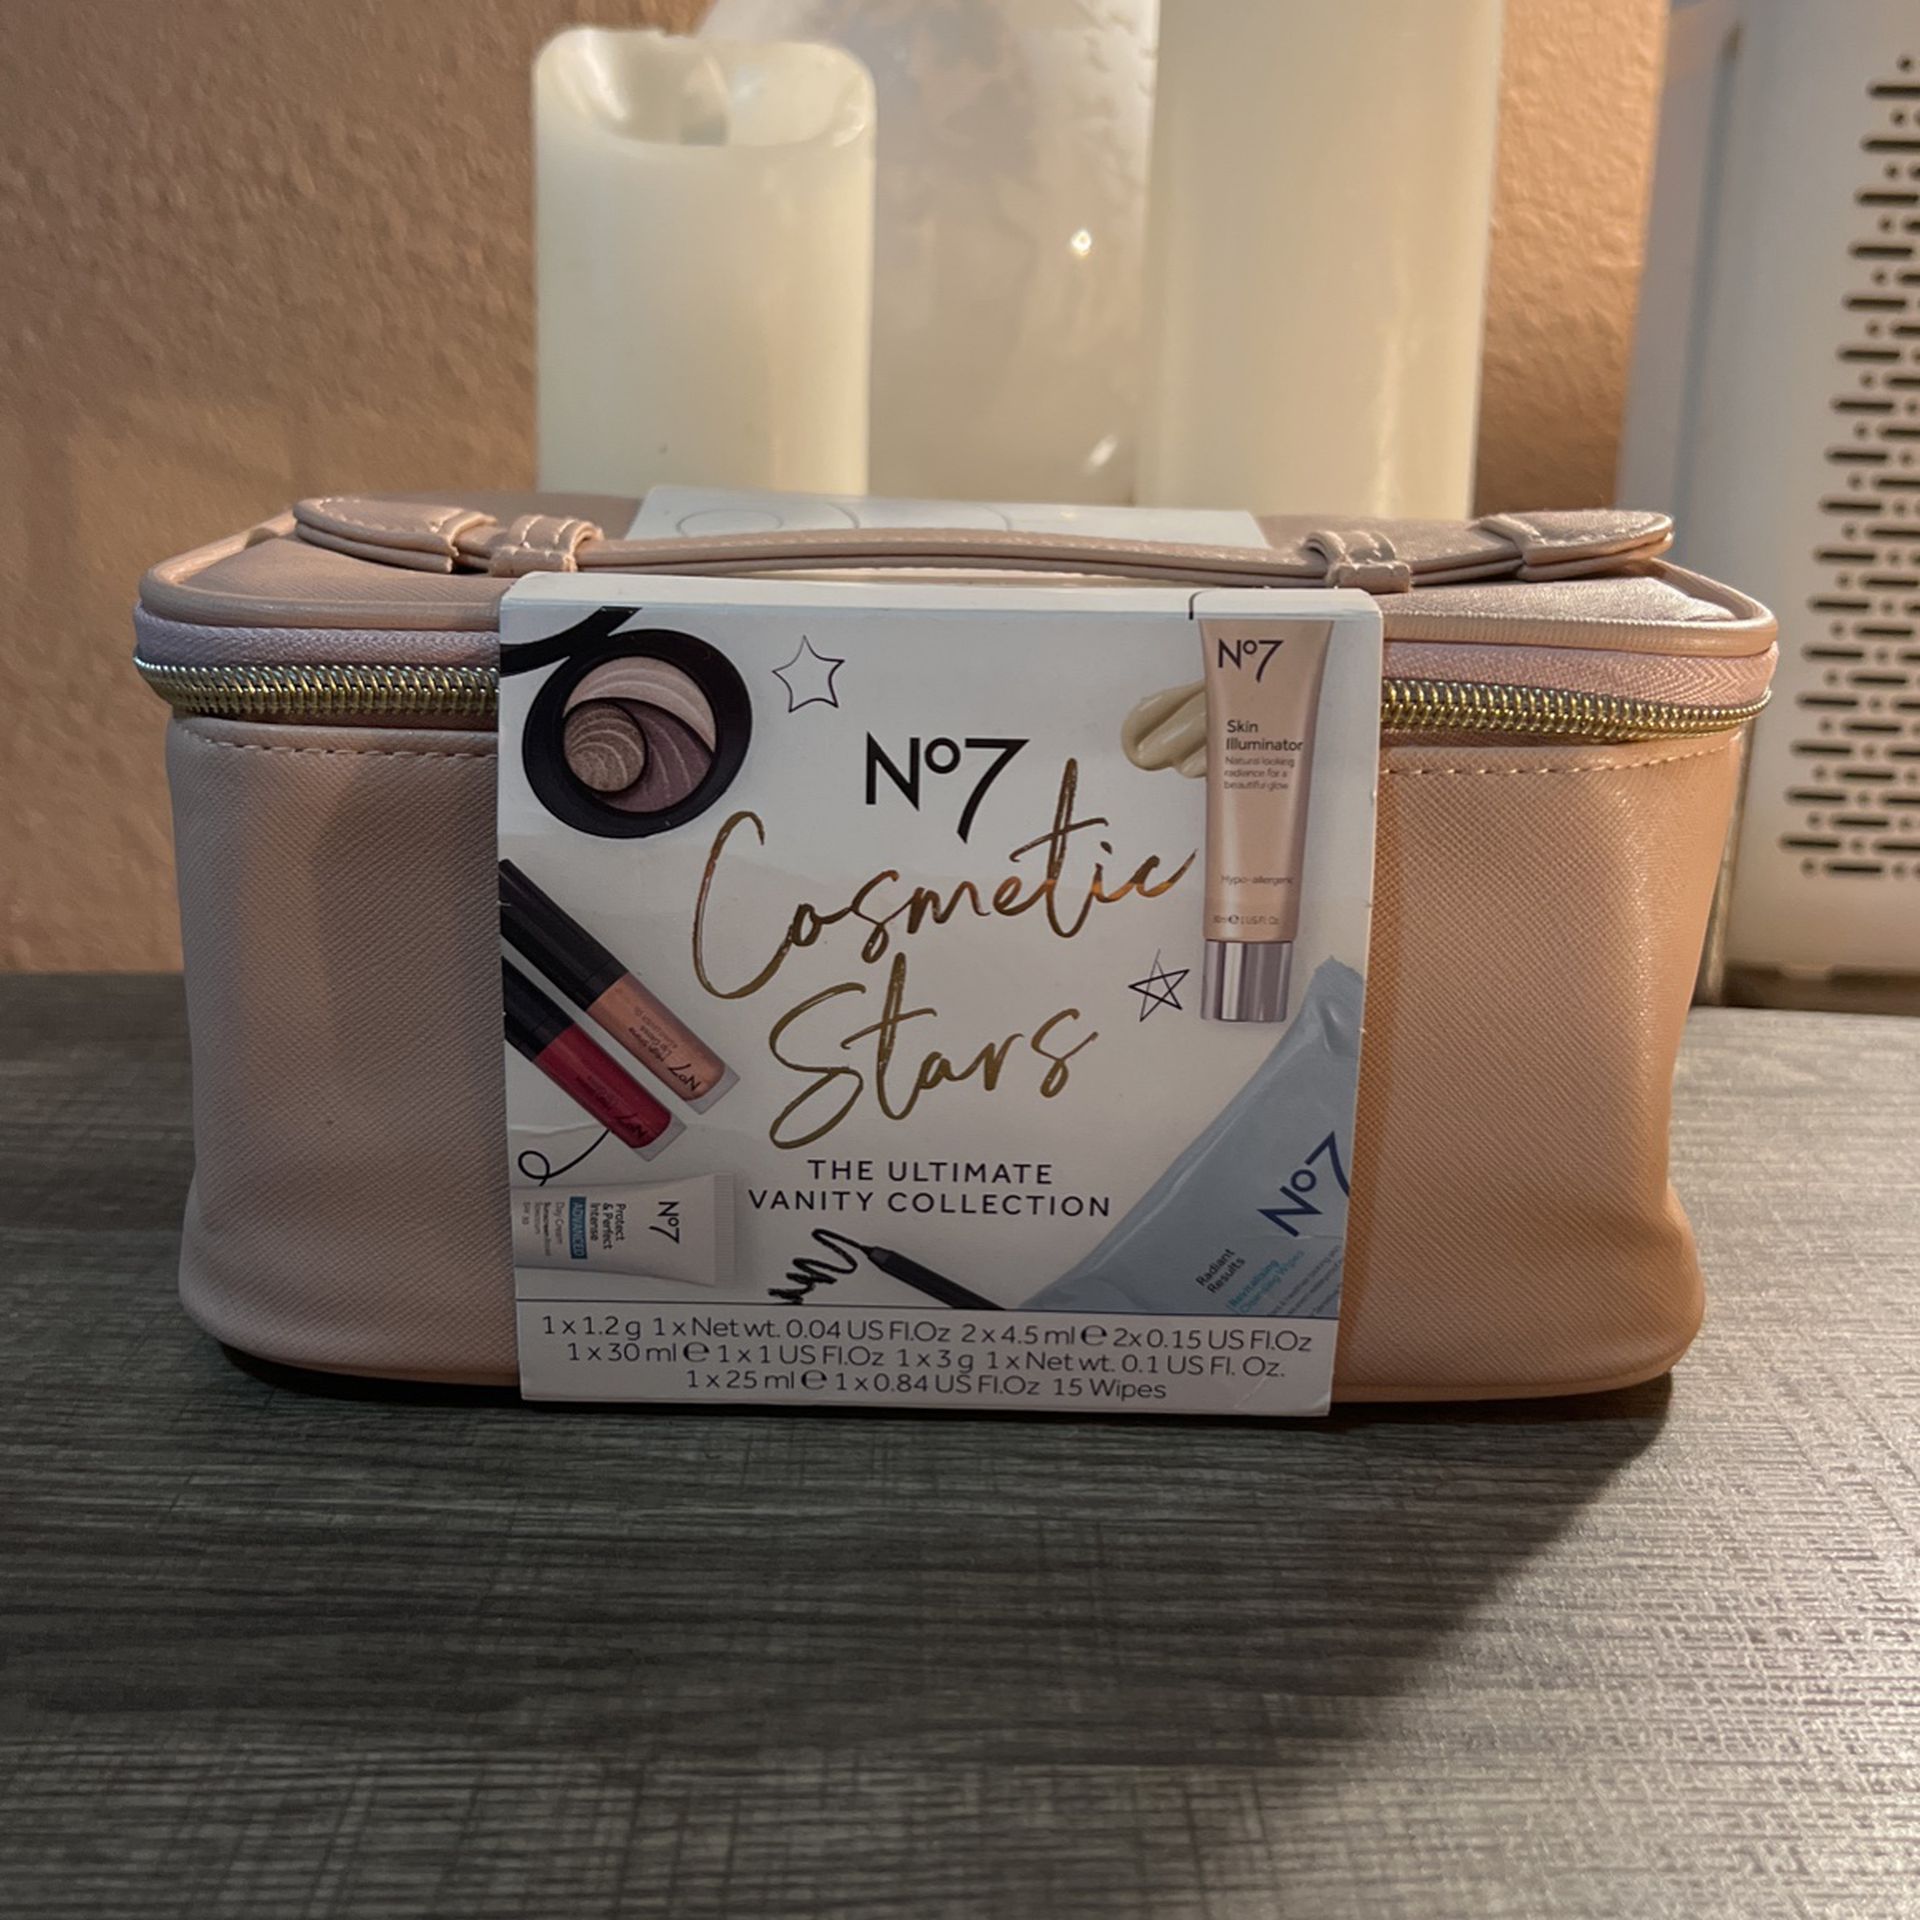 New No7 Vanity Case With 8 Pc Set Inside MuDay cream Skin Illuminater Black Eyeliner Cleansing Wipes Tri Eyeshadow 2 Lipgloss Inside $30 C My Page Ty 